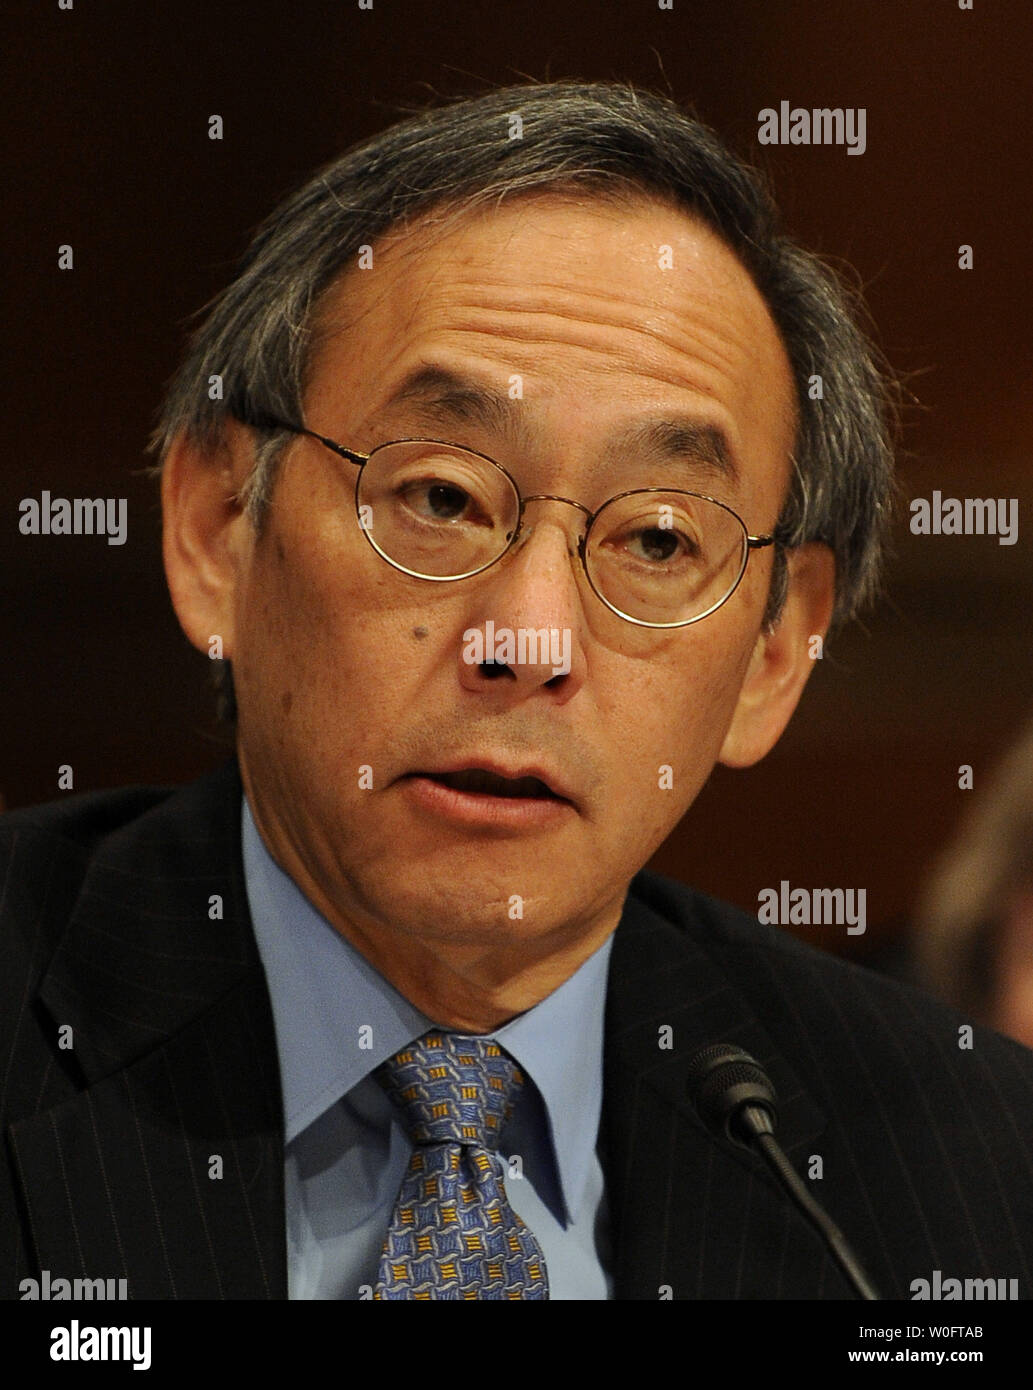 Secretary of Energy Steven Chu testifies before the Senate Armed Services Committee regarding the new Strategic Arms Reduction Treaty (START) with Russia, aimed at reducing strategic nuclear arms, on Capitol Hill in Washington on June 17, 2010.    UPI/Roger L. Wollenberg Stock Photo